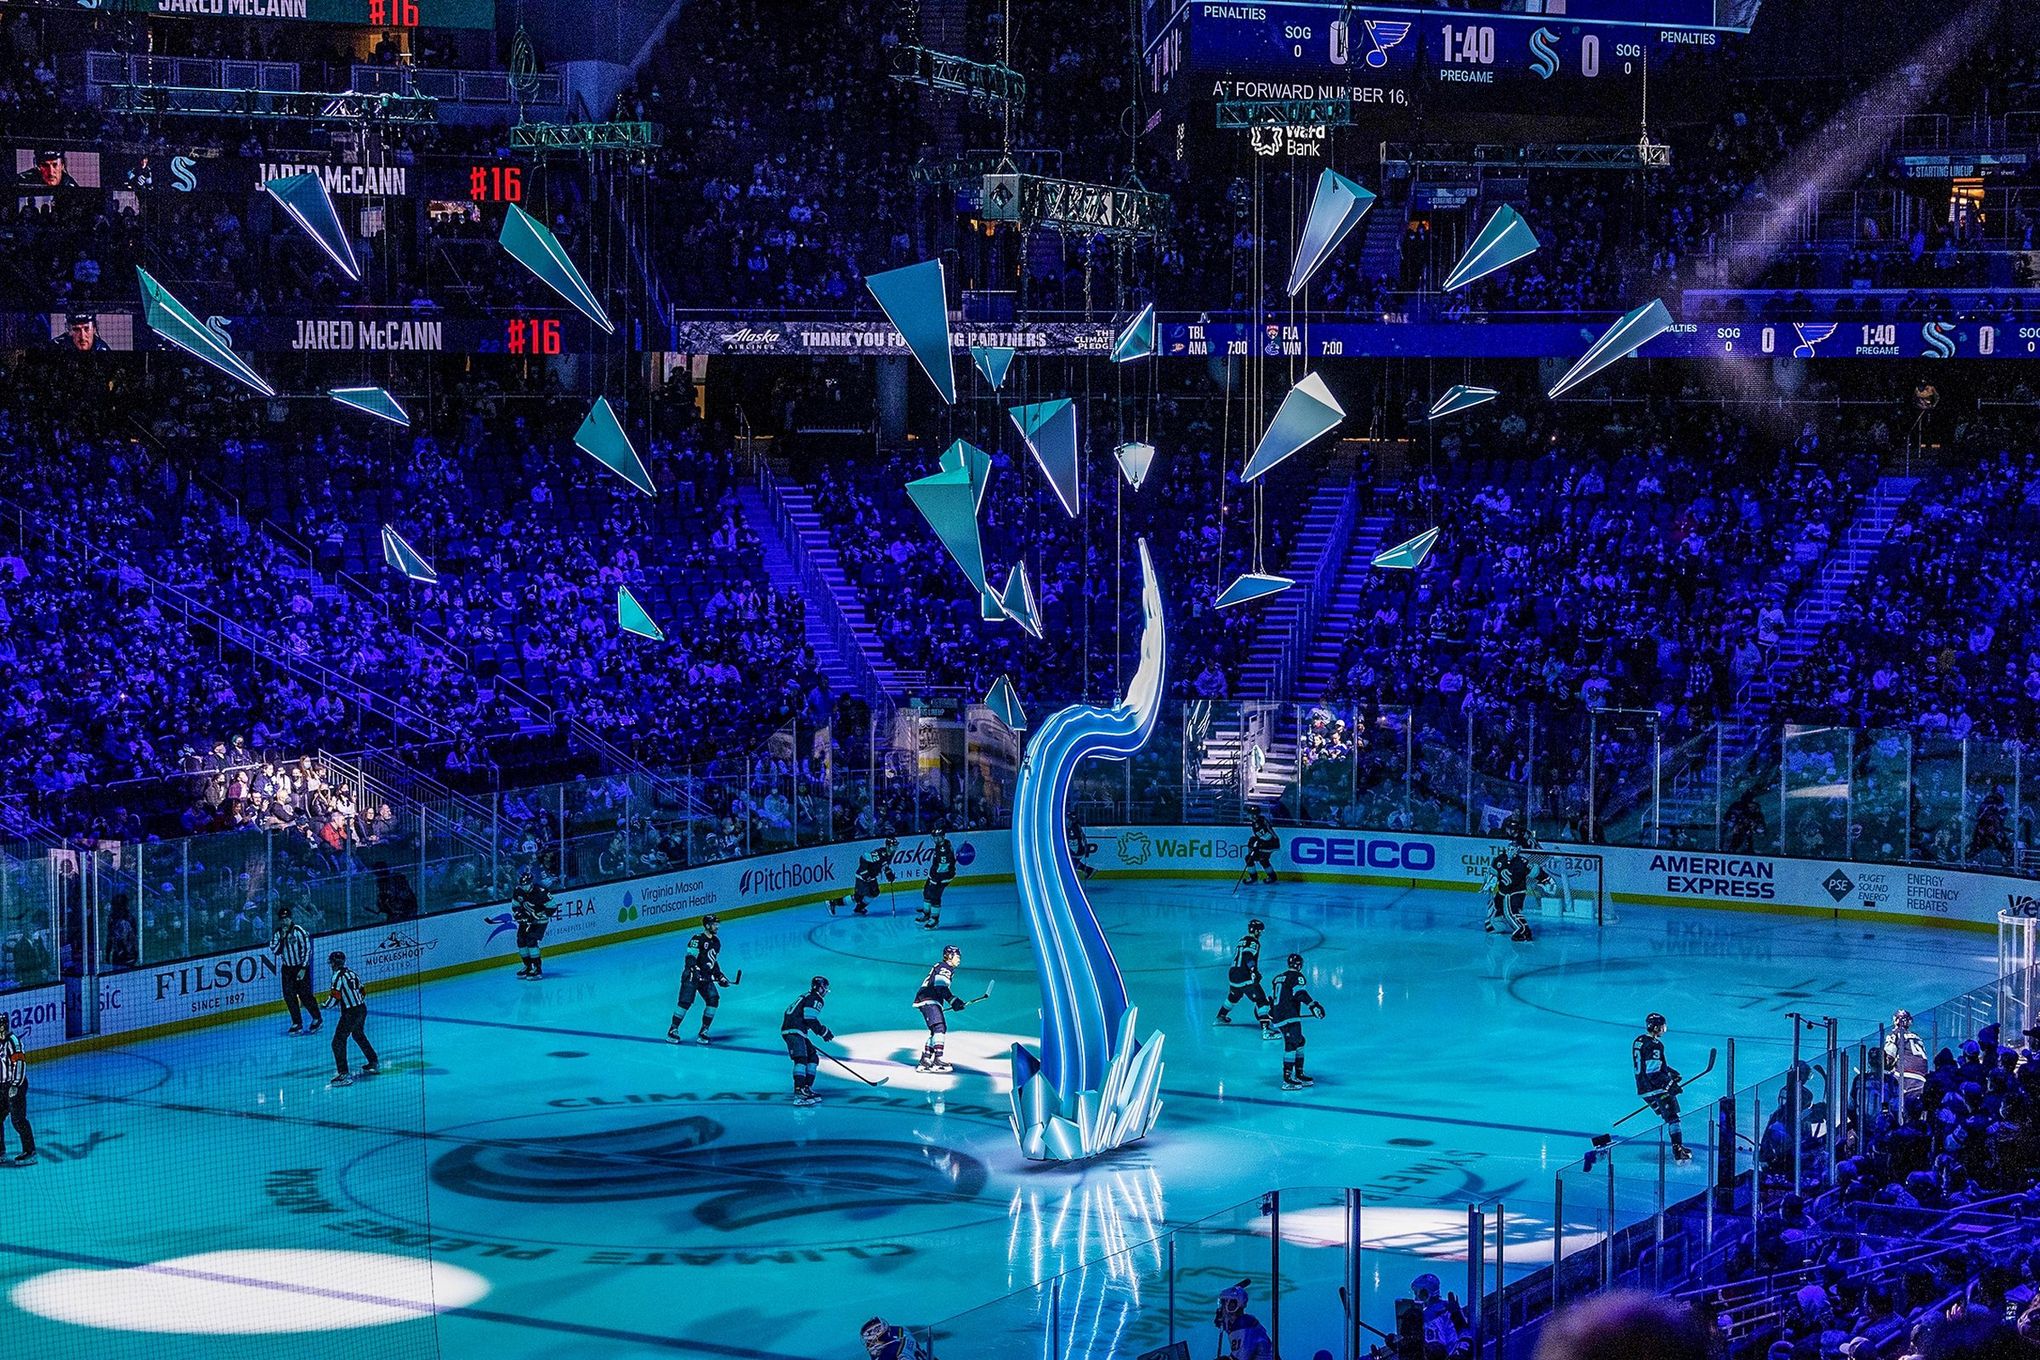 As NHL playoffs progress, arenas filling up, atmosphere returning to normal